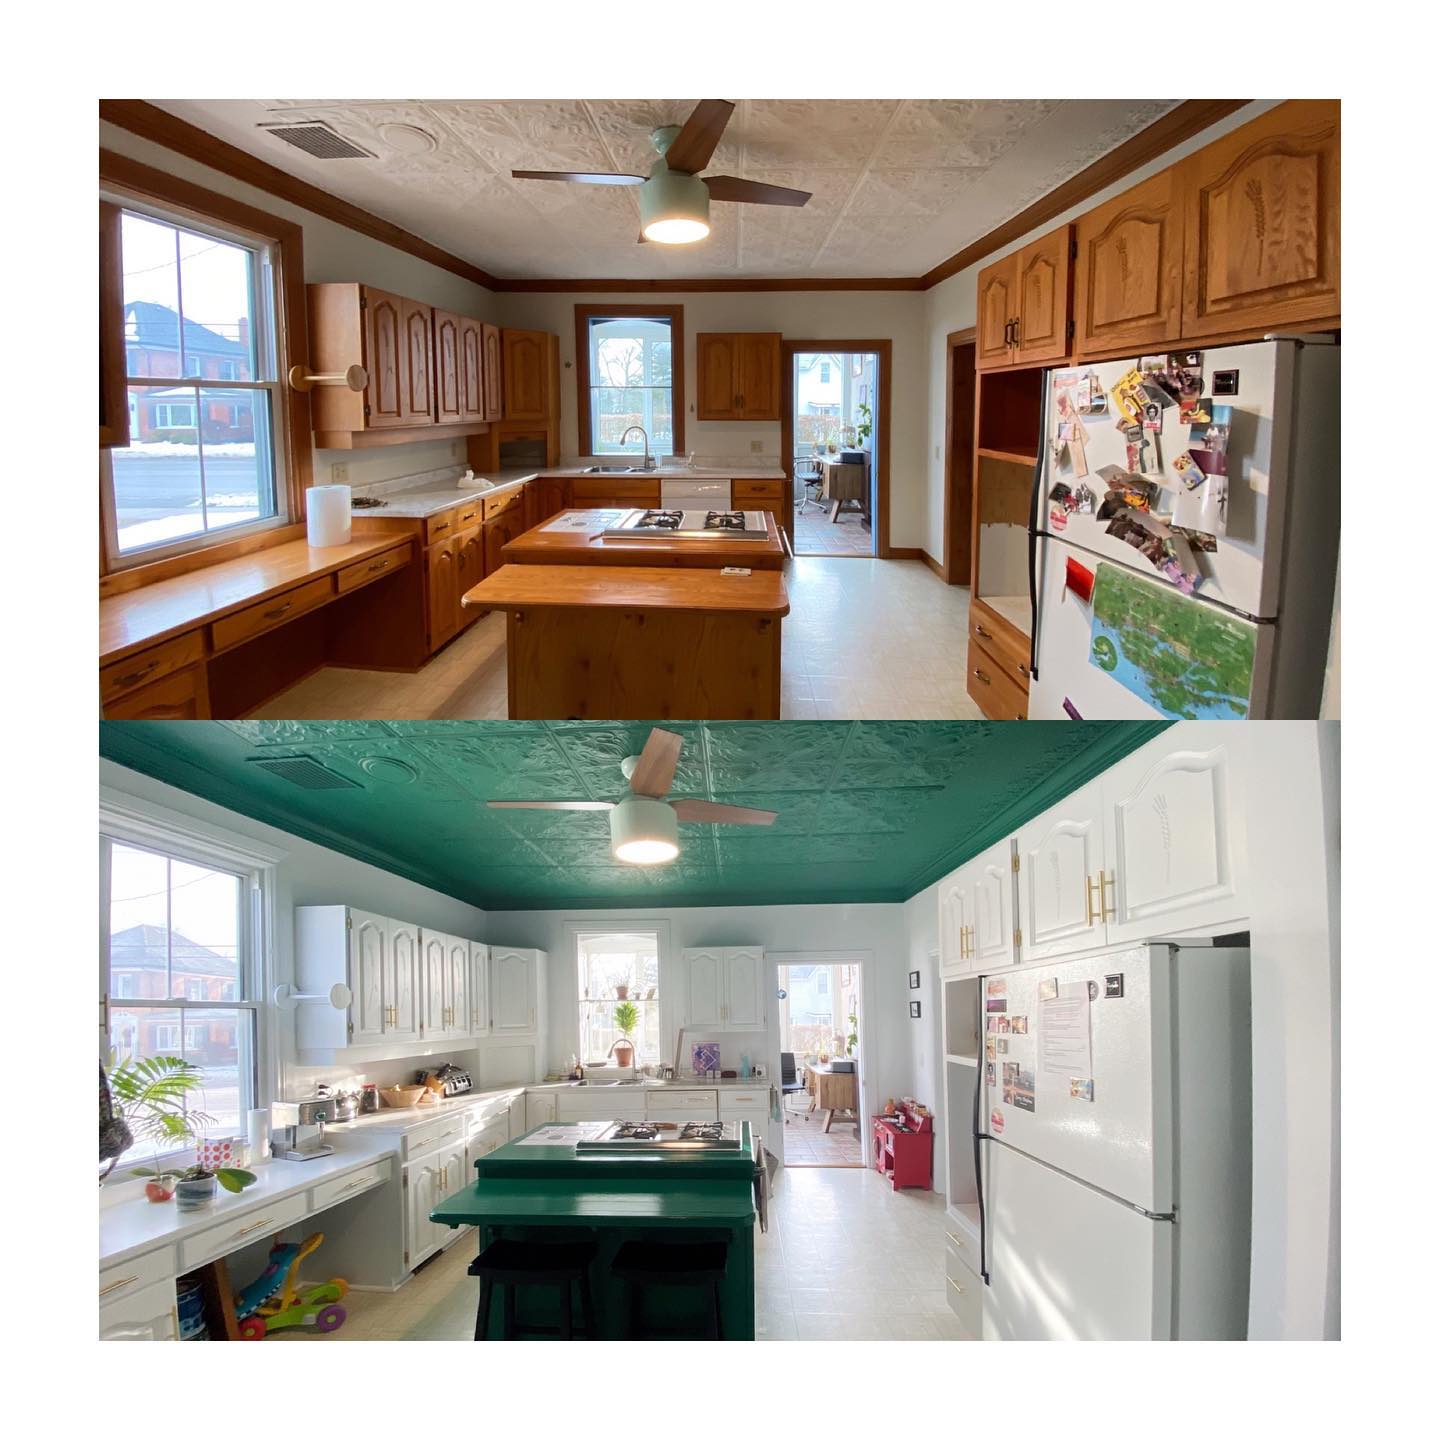 before & after kitchen